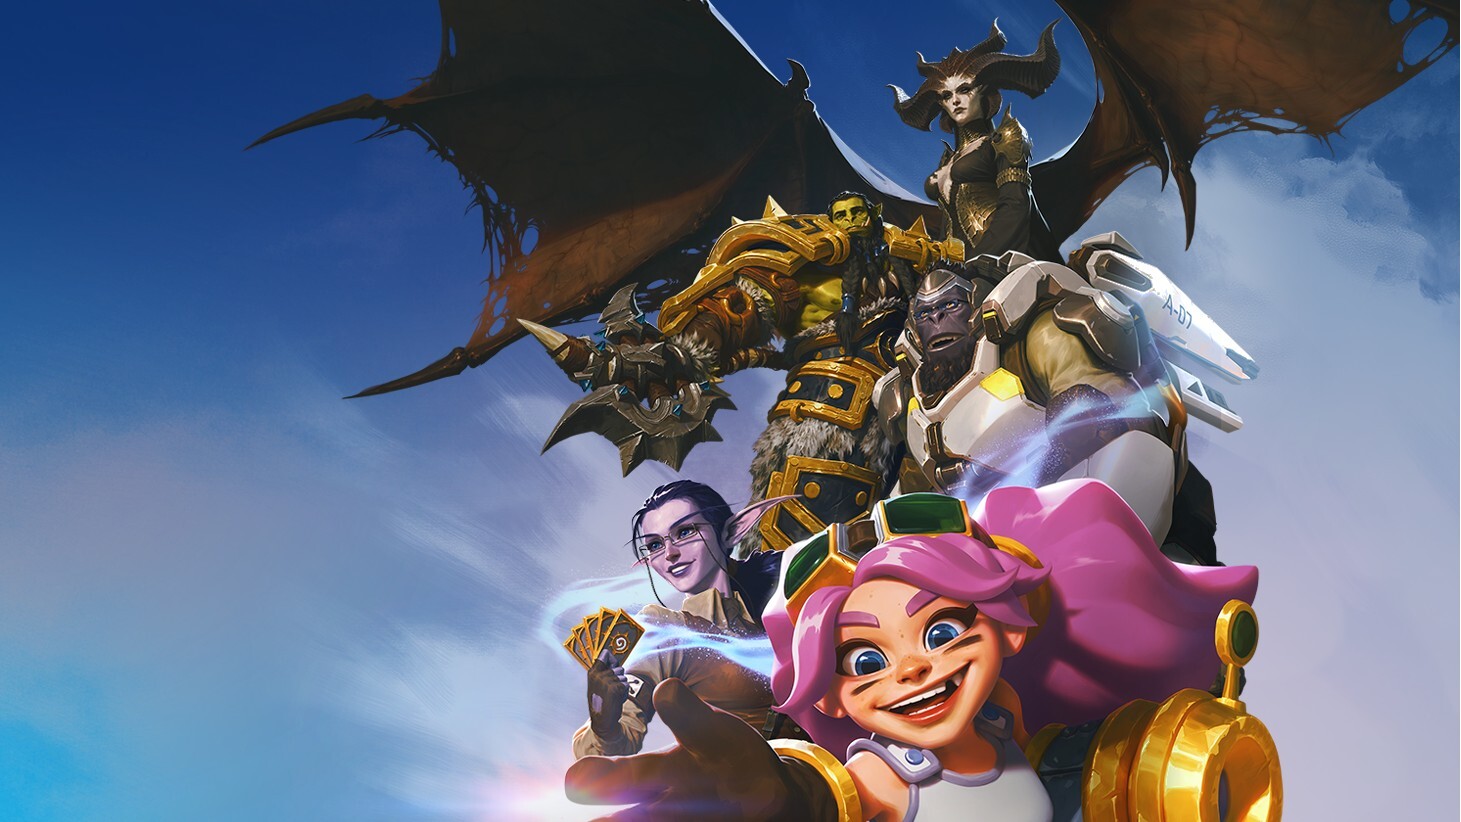 Heroes of the Storm team discusses Blizzcon 2019 plans, the